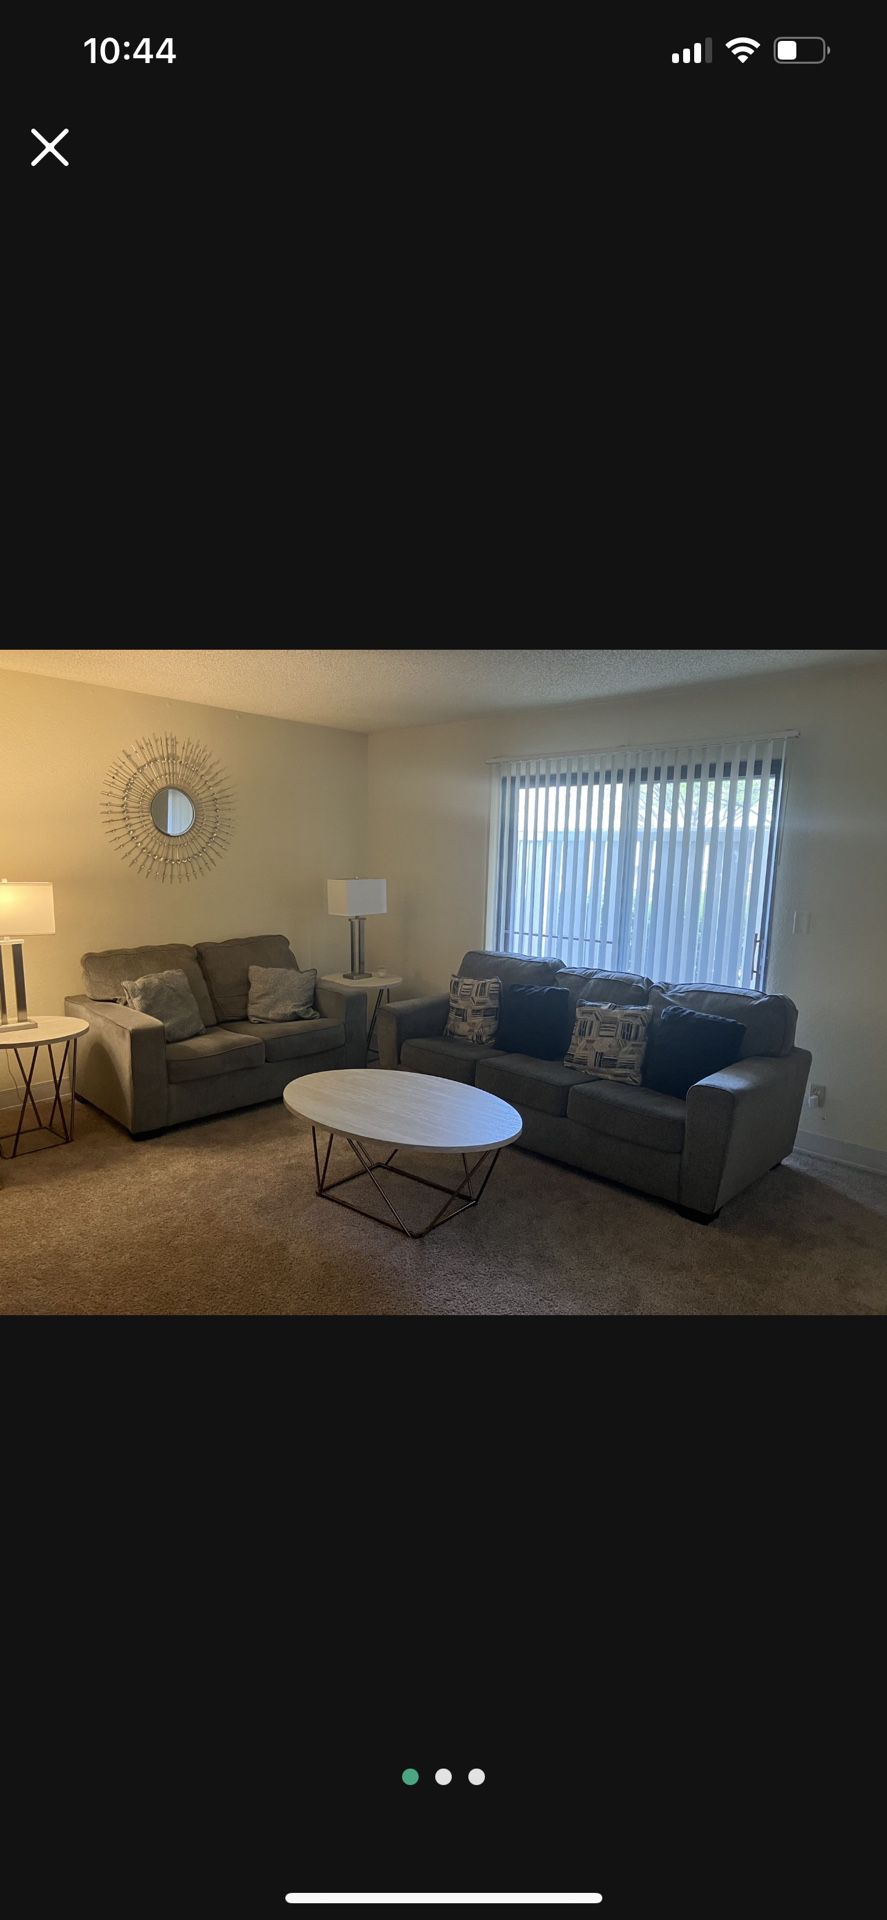 Sofa Set With Tables And Lamps Included